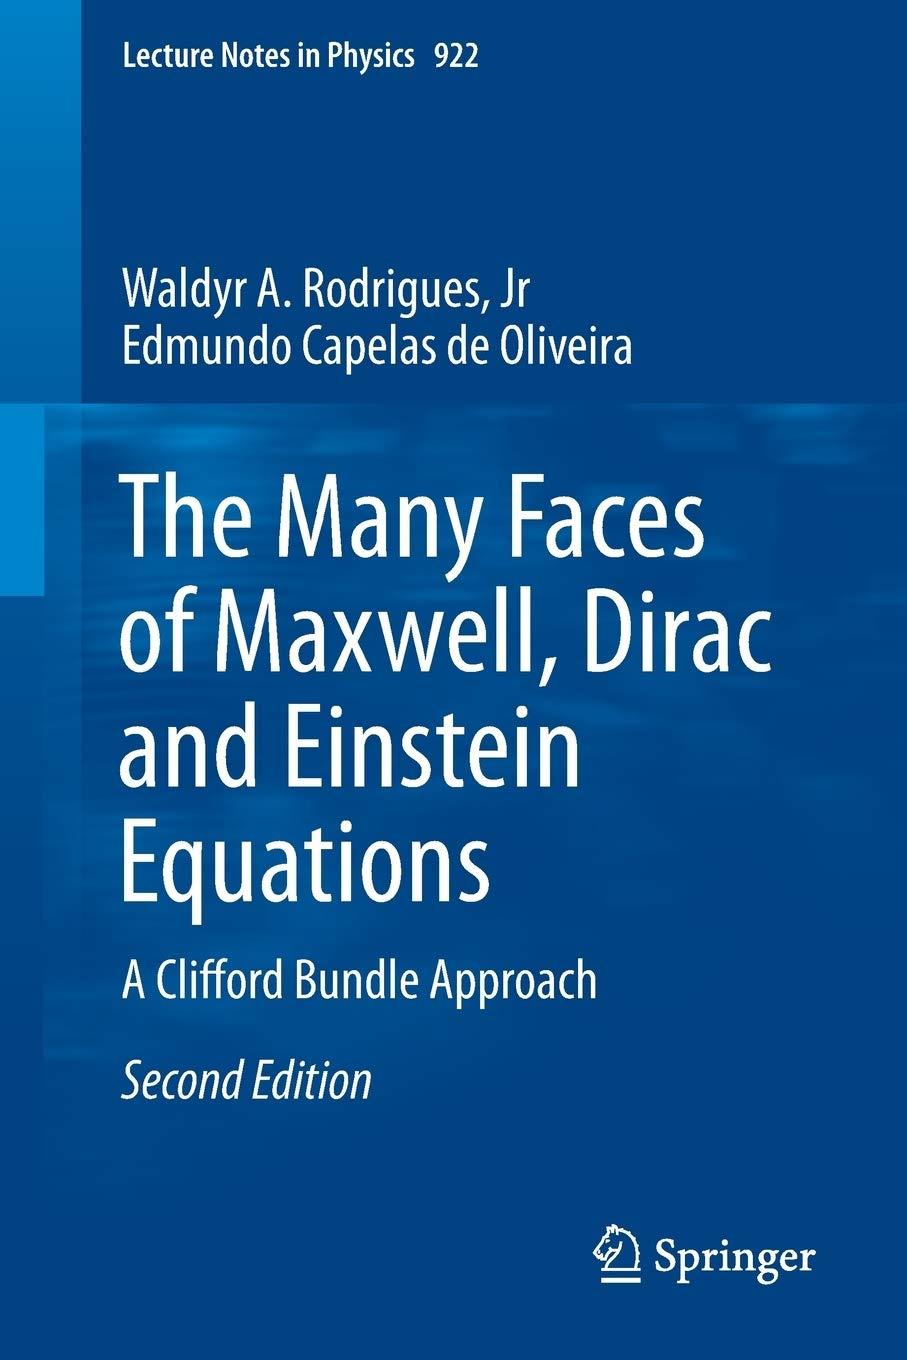 the many faces of maxwell dirac and einstein equations a clifford bundle approach 2nd edition jr. waldyr a.